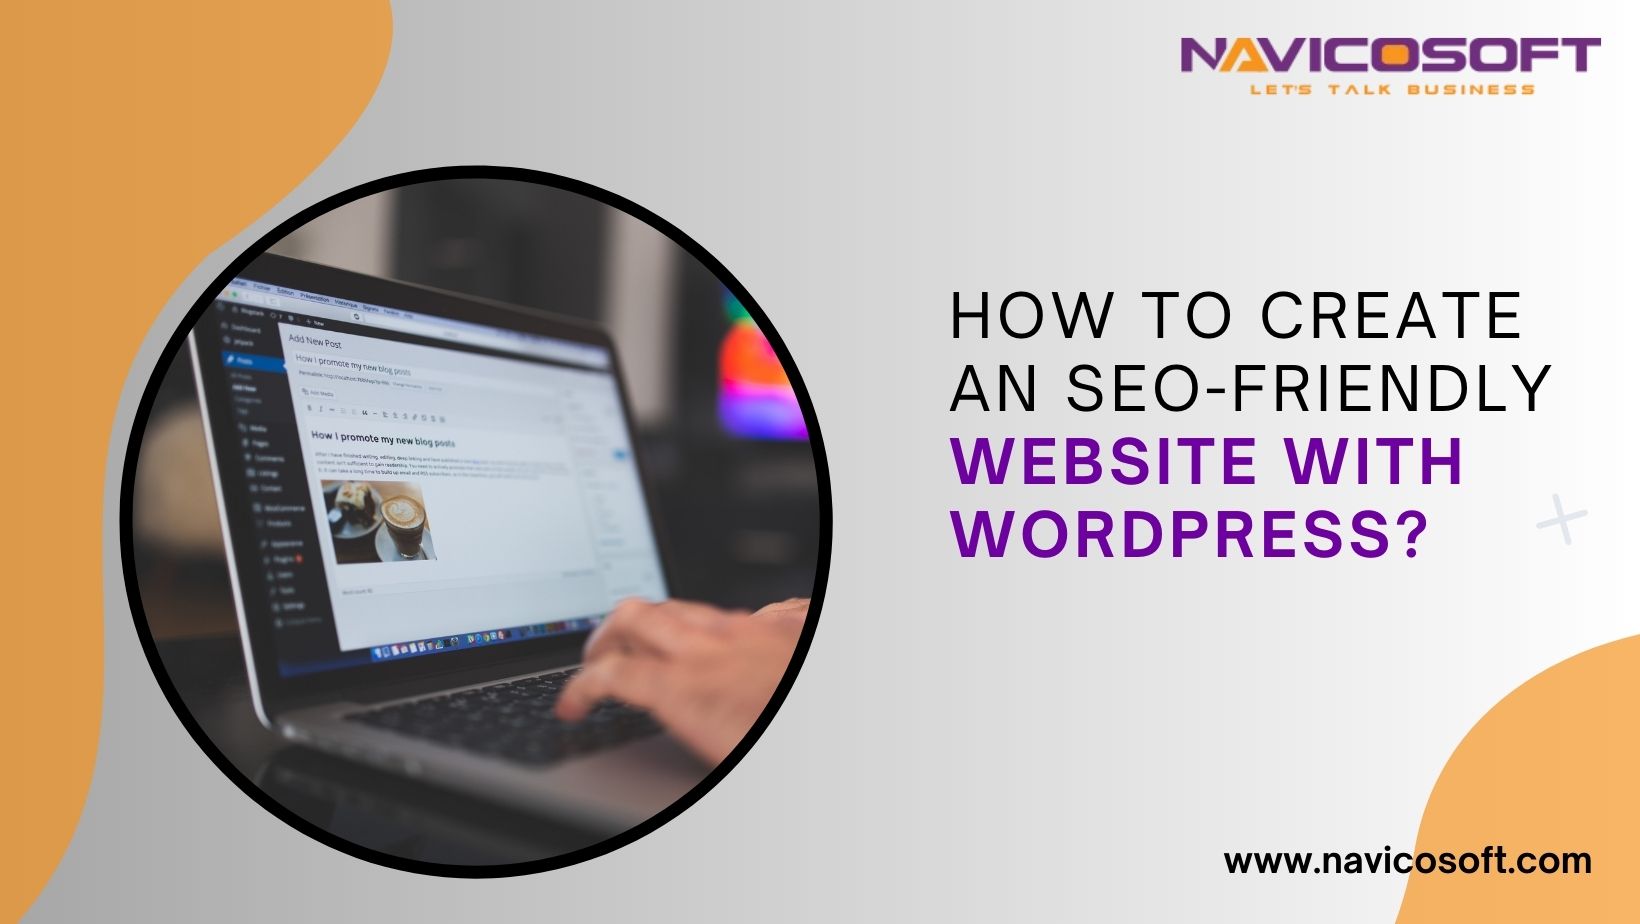 How to create an SEO-friendly website with WordPress?